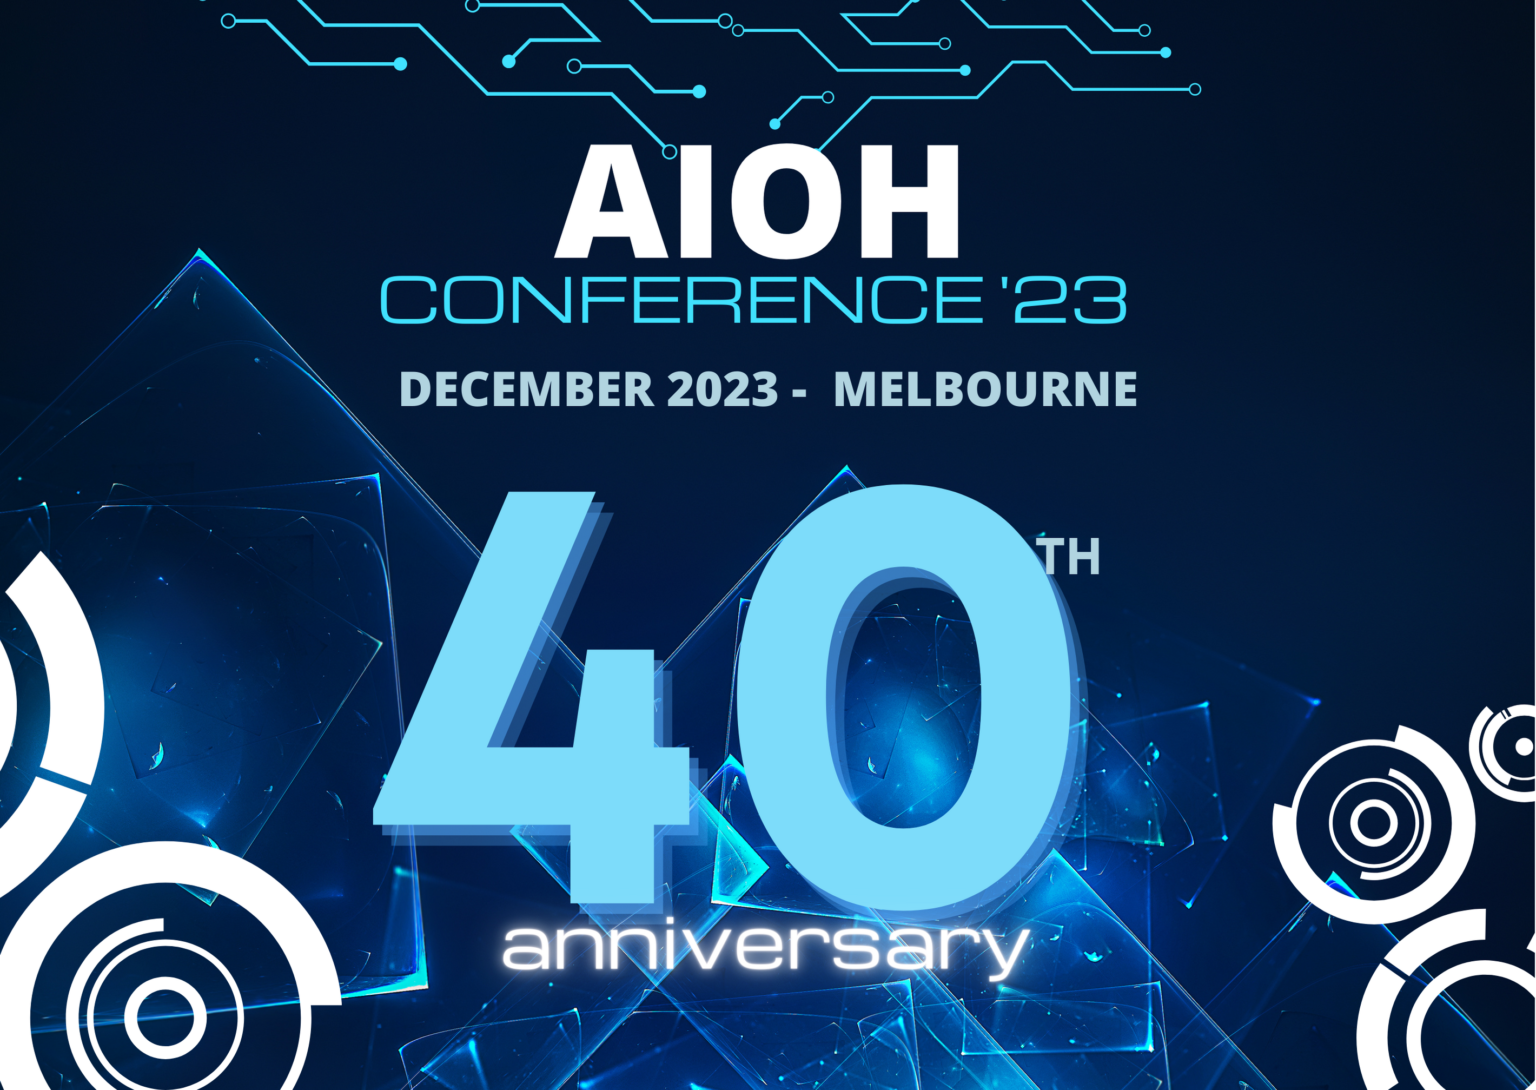 Annual Conference AIOH